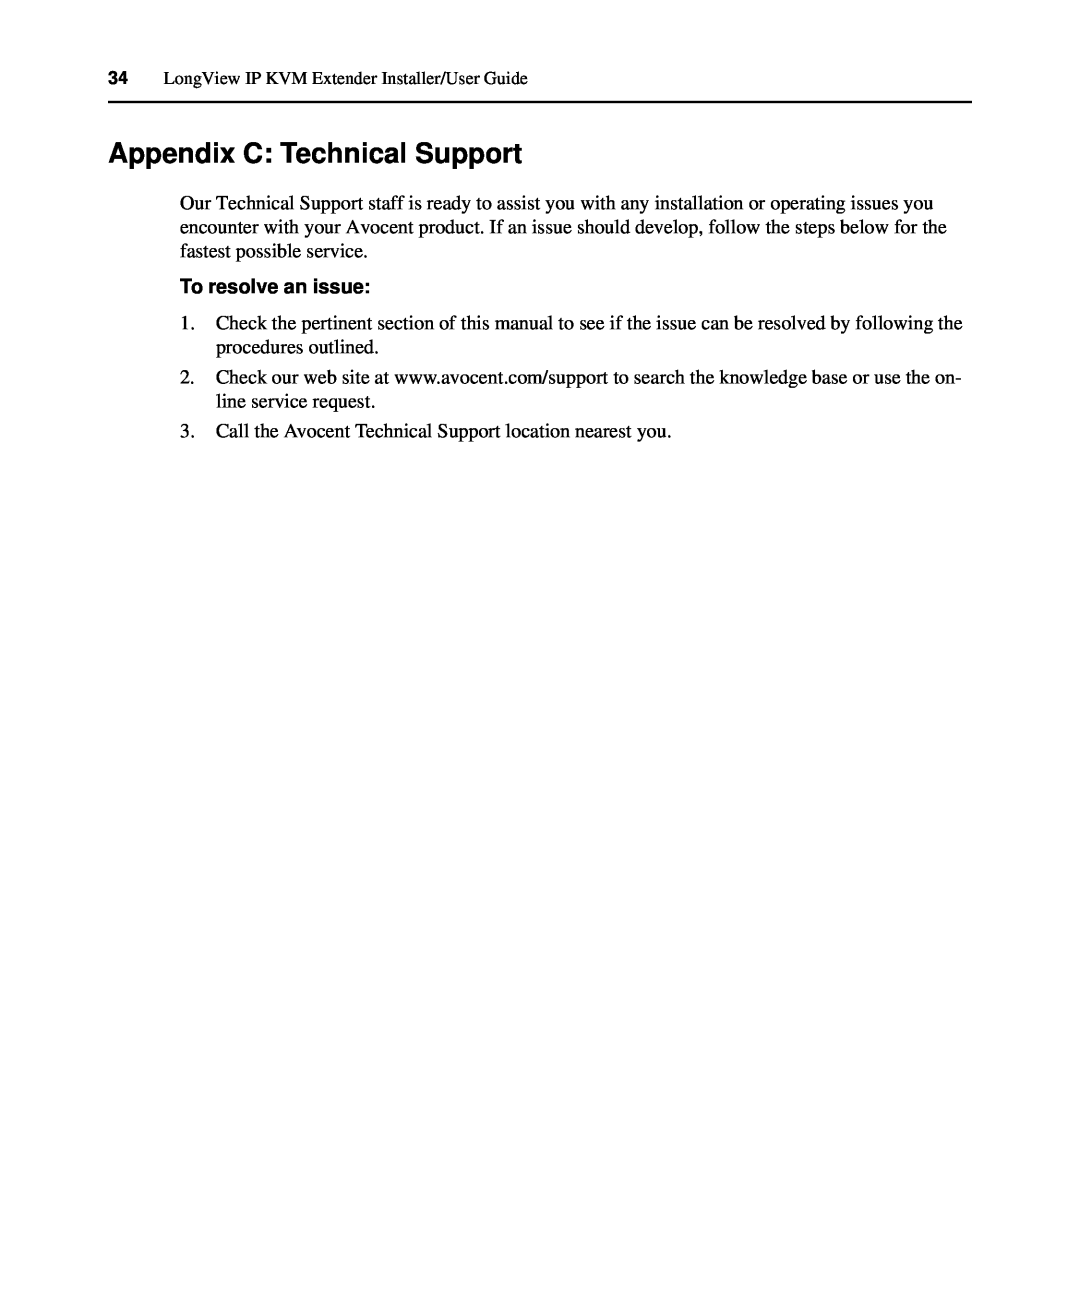 Avocent LongView IP manual Appendix C Technical Support, To resolve an issue 